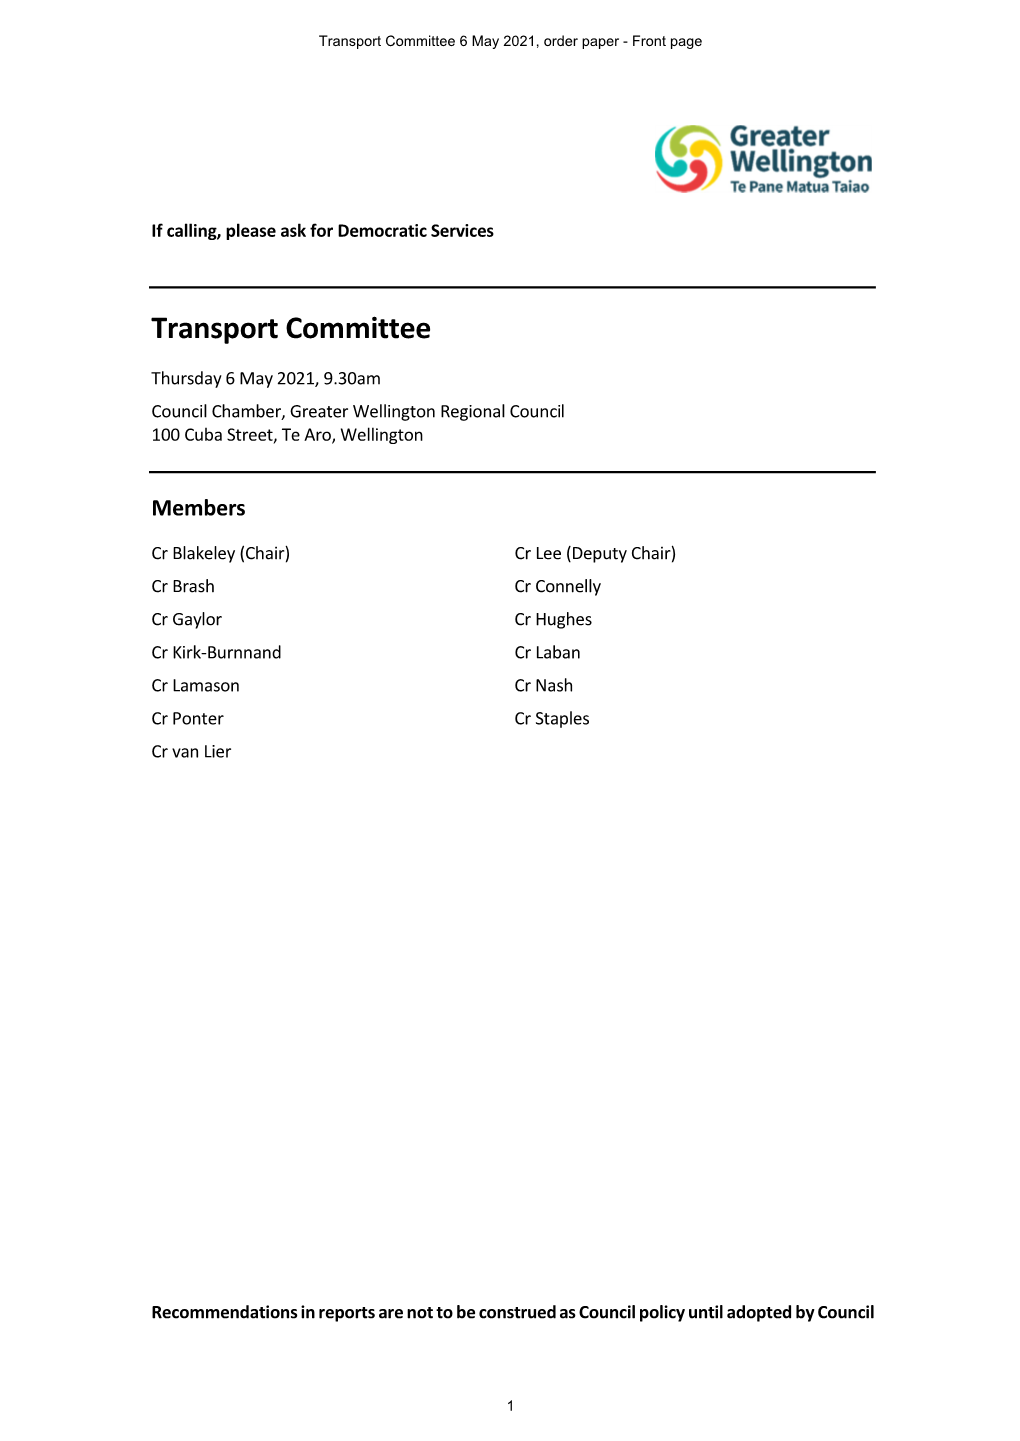 Transport Committee 6 May 2021, Order Paper - Front Page